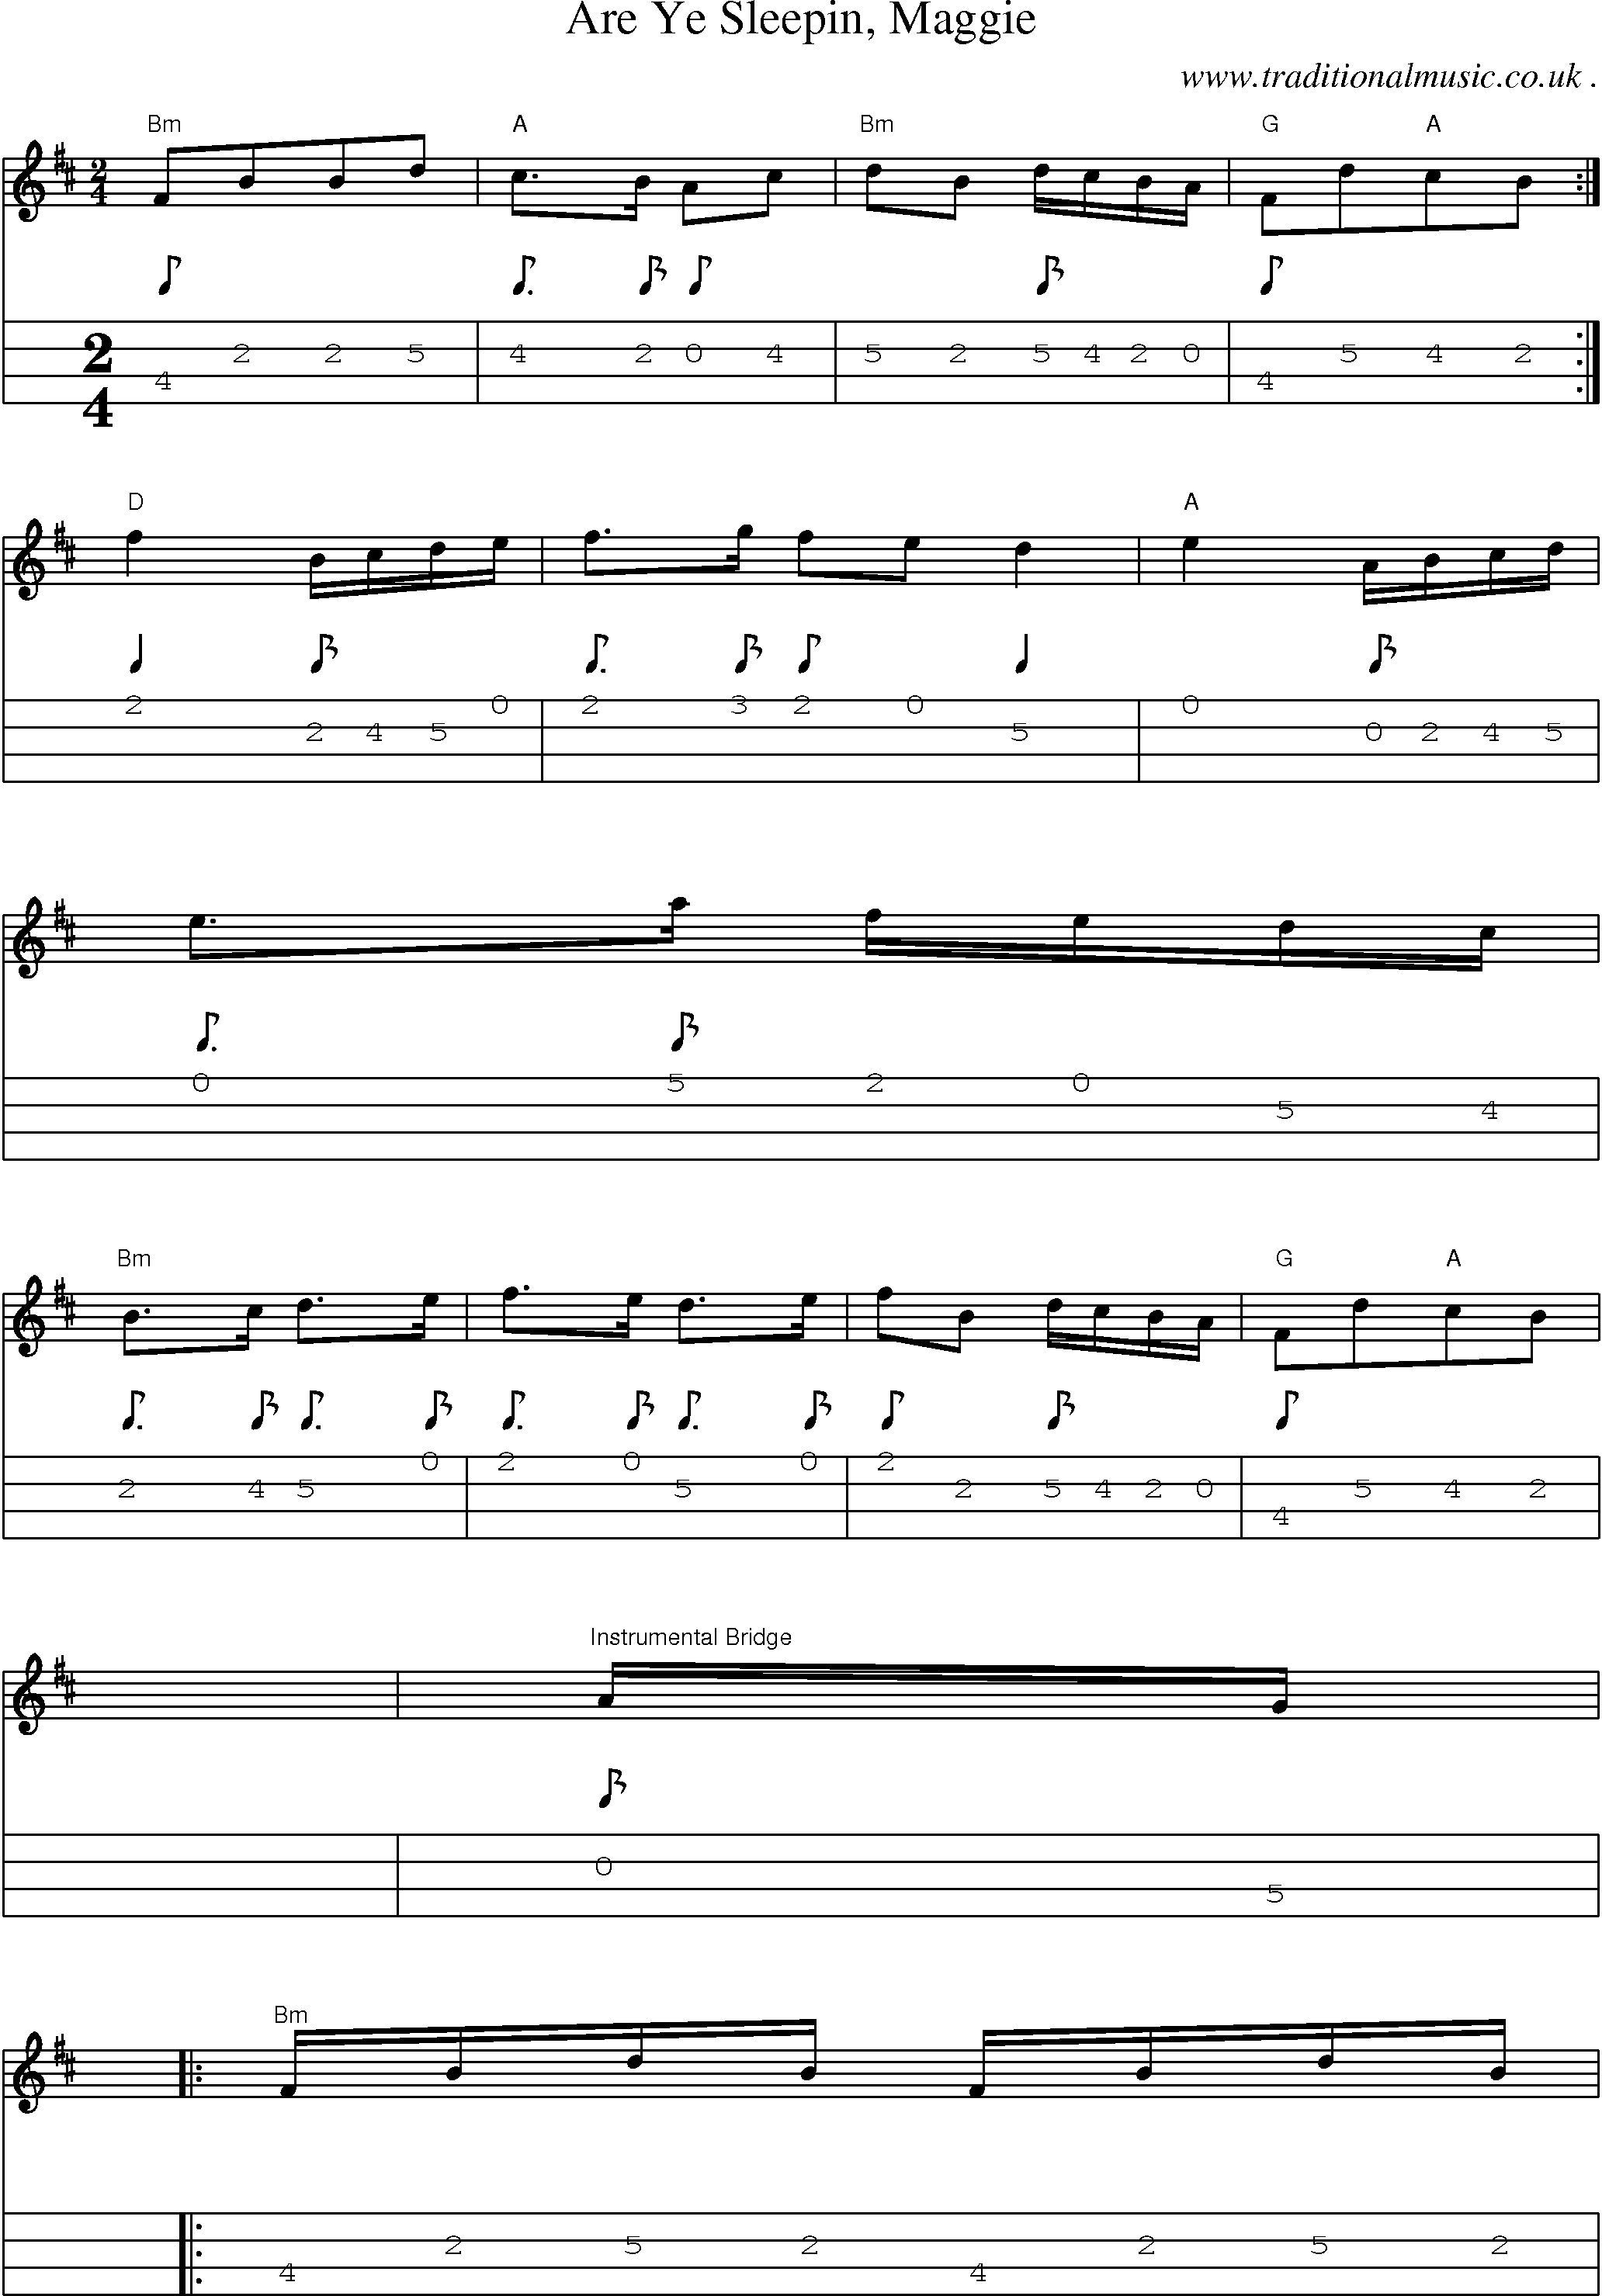 Sheet-Music and Mandolin Tabs for Are Ye Sleepin Maggie